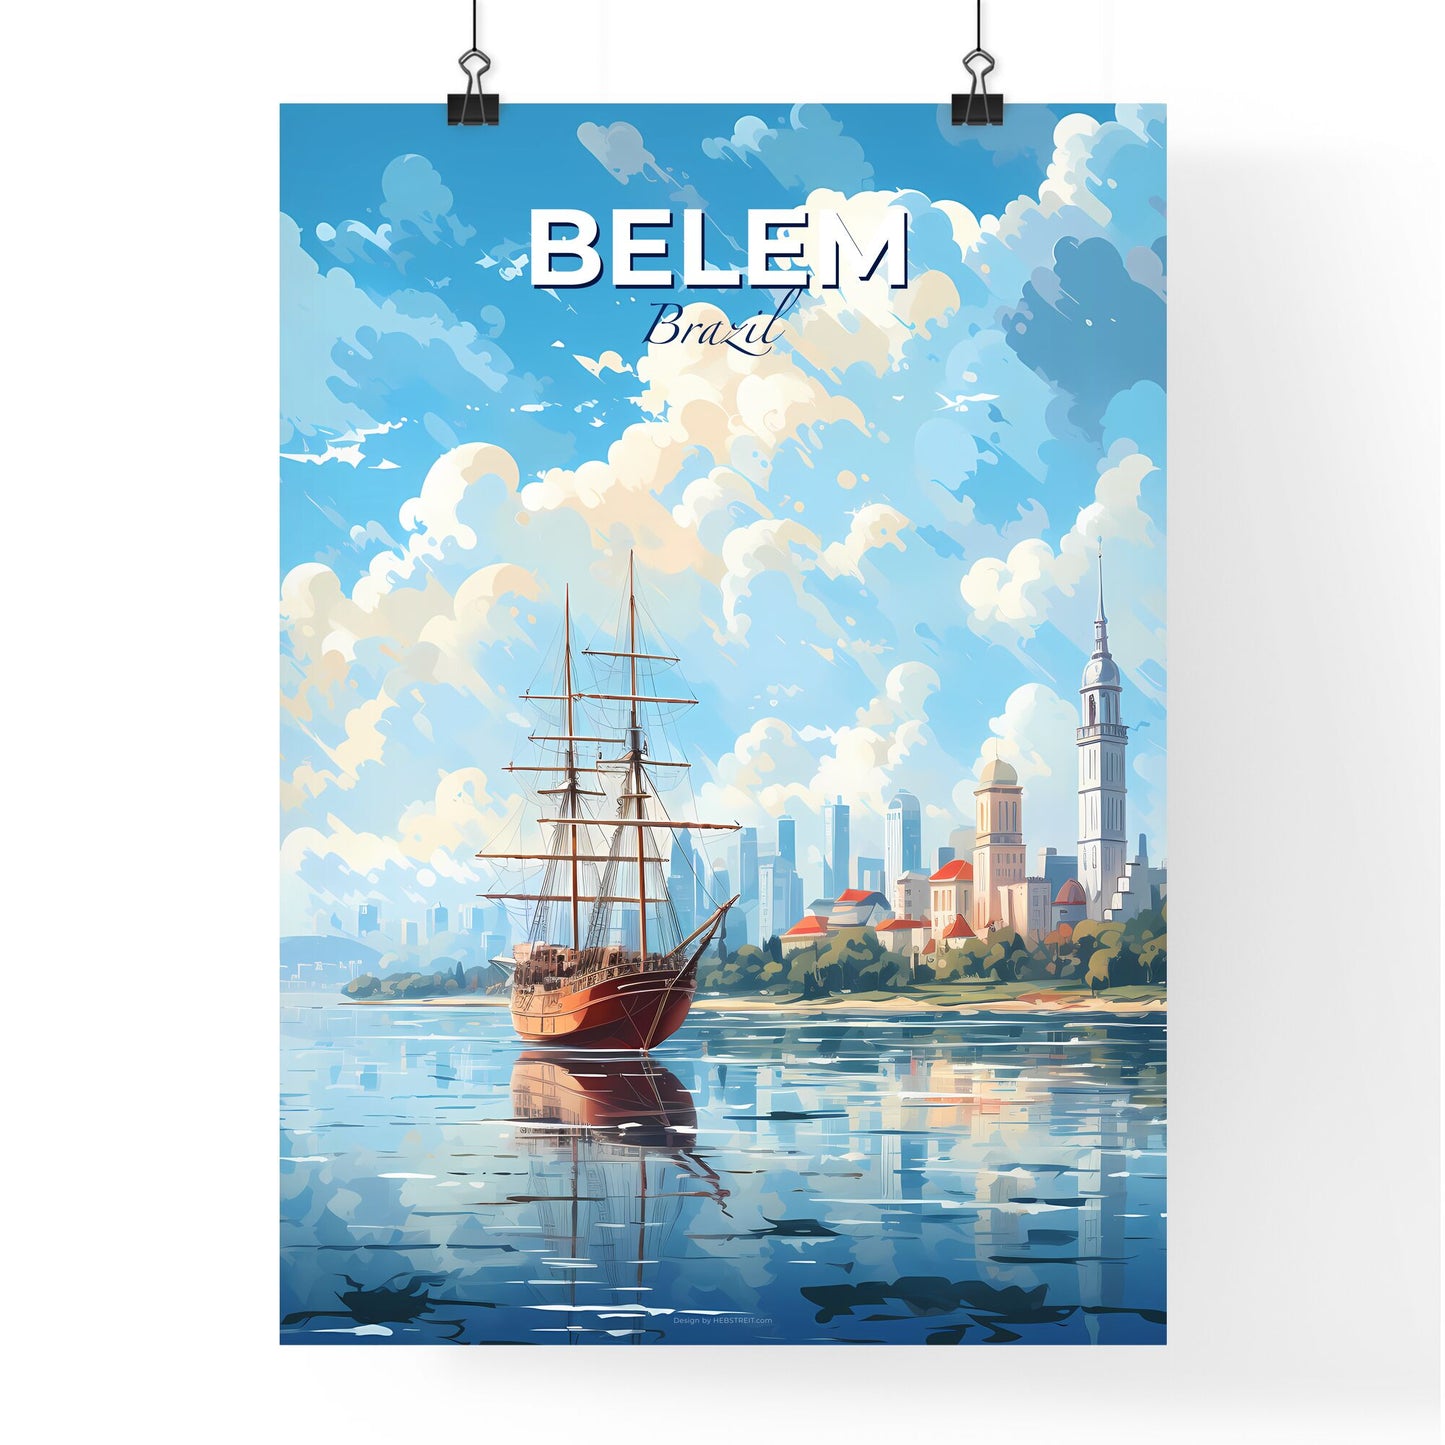 Belem Brazil Skyline - A Sailboat On The Water - Customizable Travel Gift Default Title